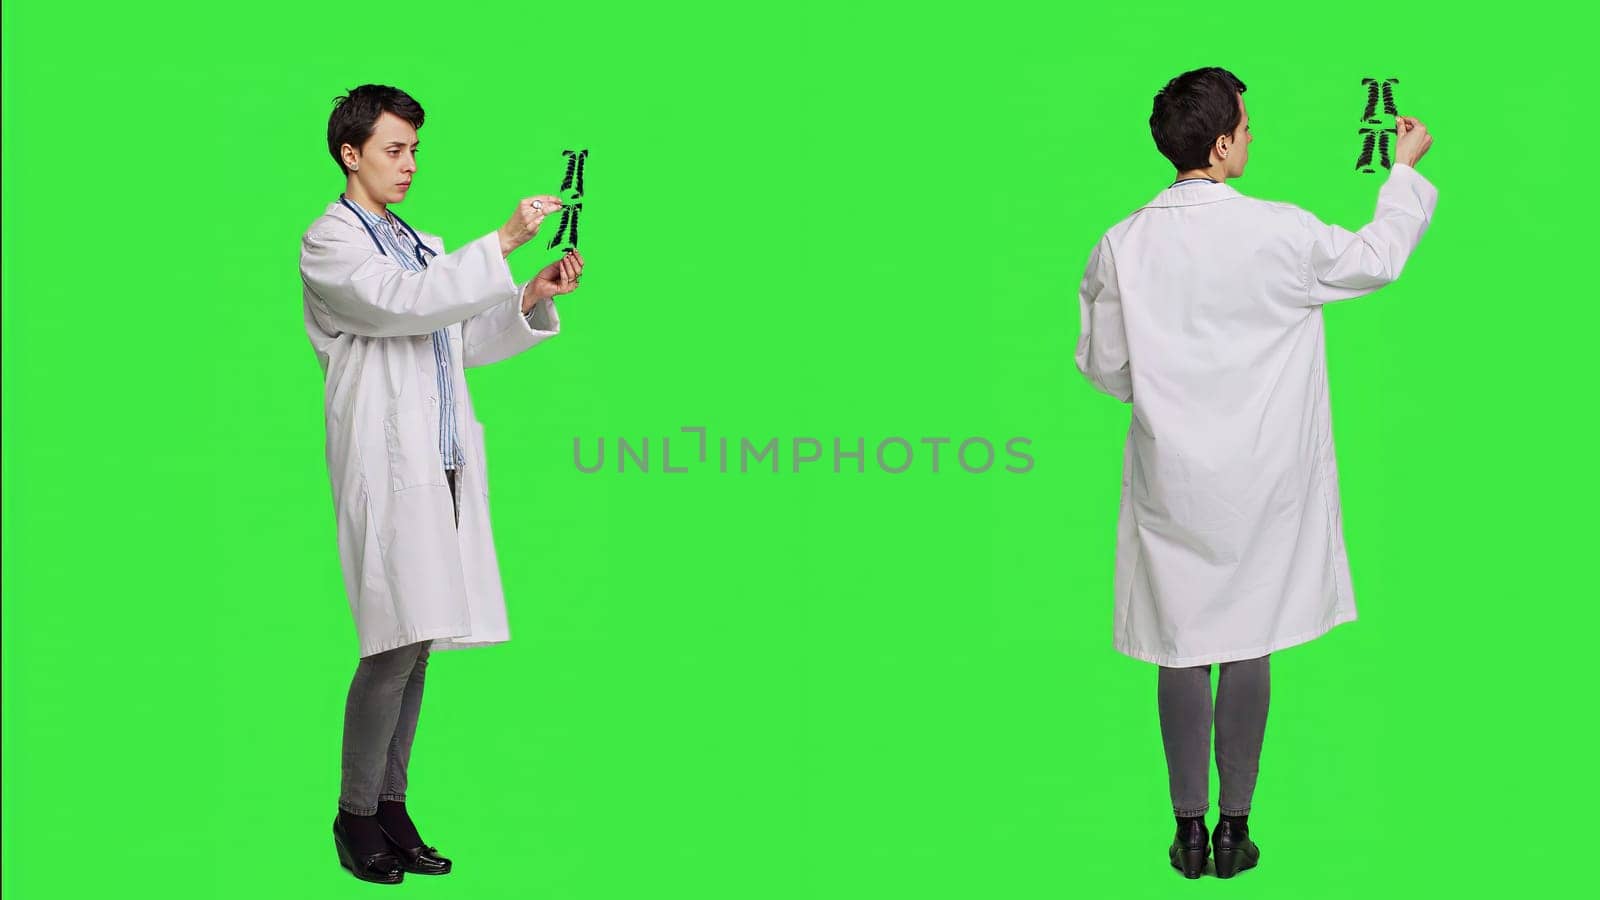 General practitioner examining radiography scan against greenscreen backdrop by DCStudio